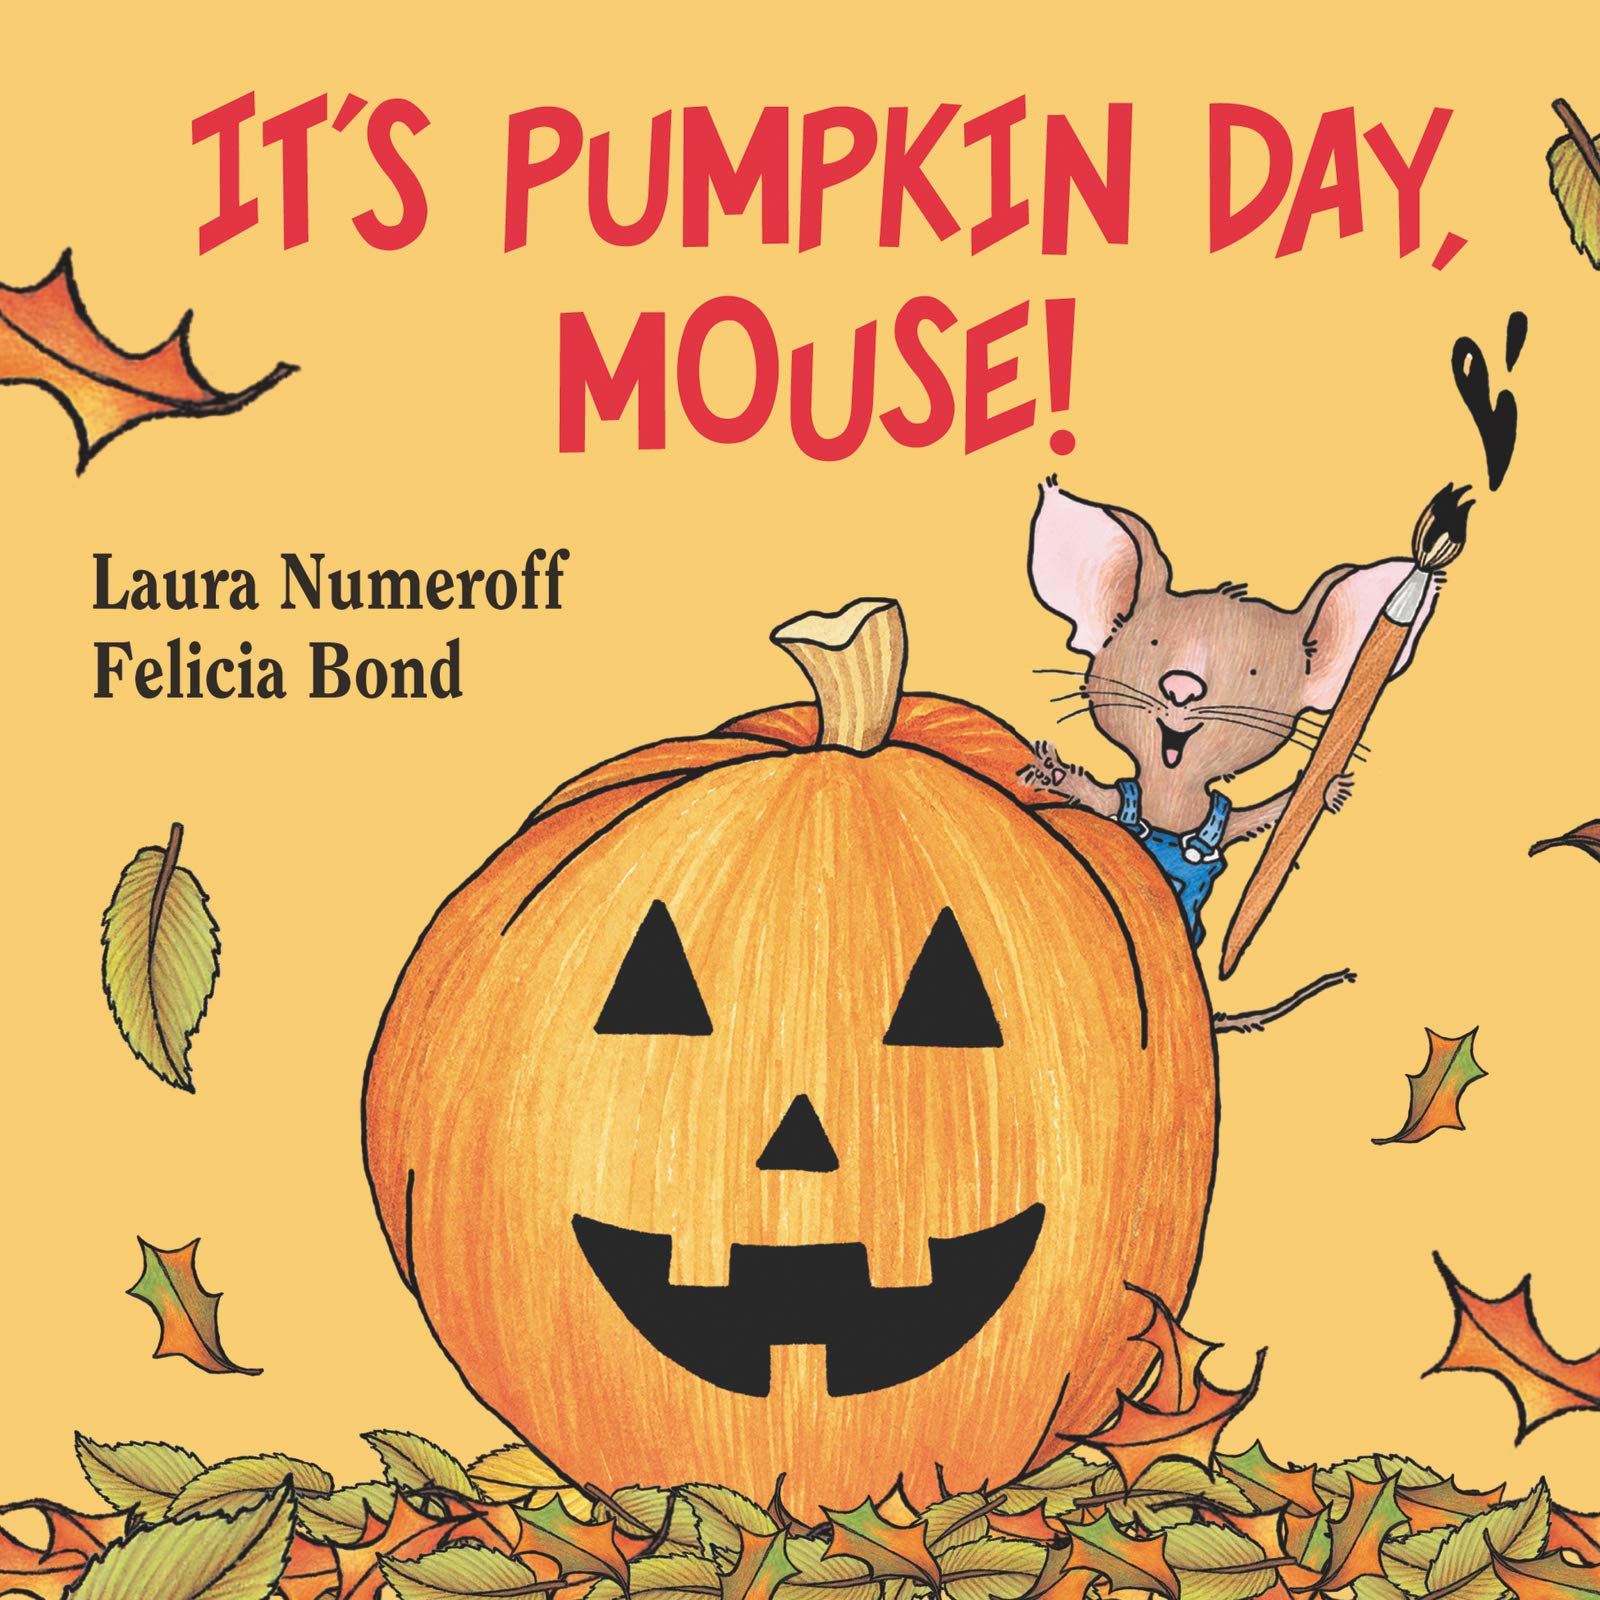 "It's Pumpkin Day, Mouse!" by Laura Numeroff